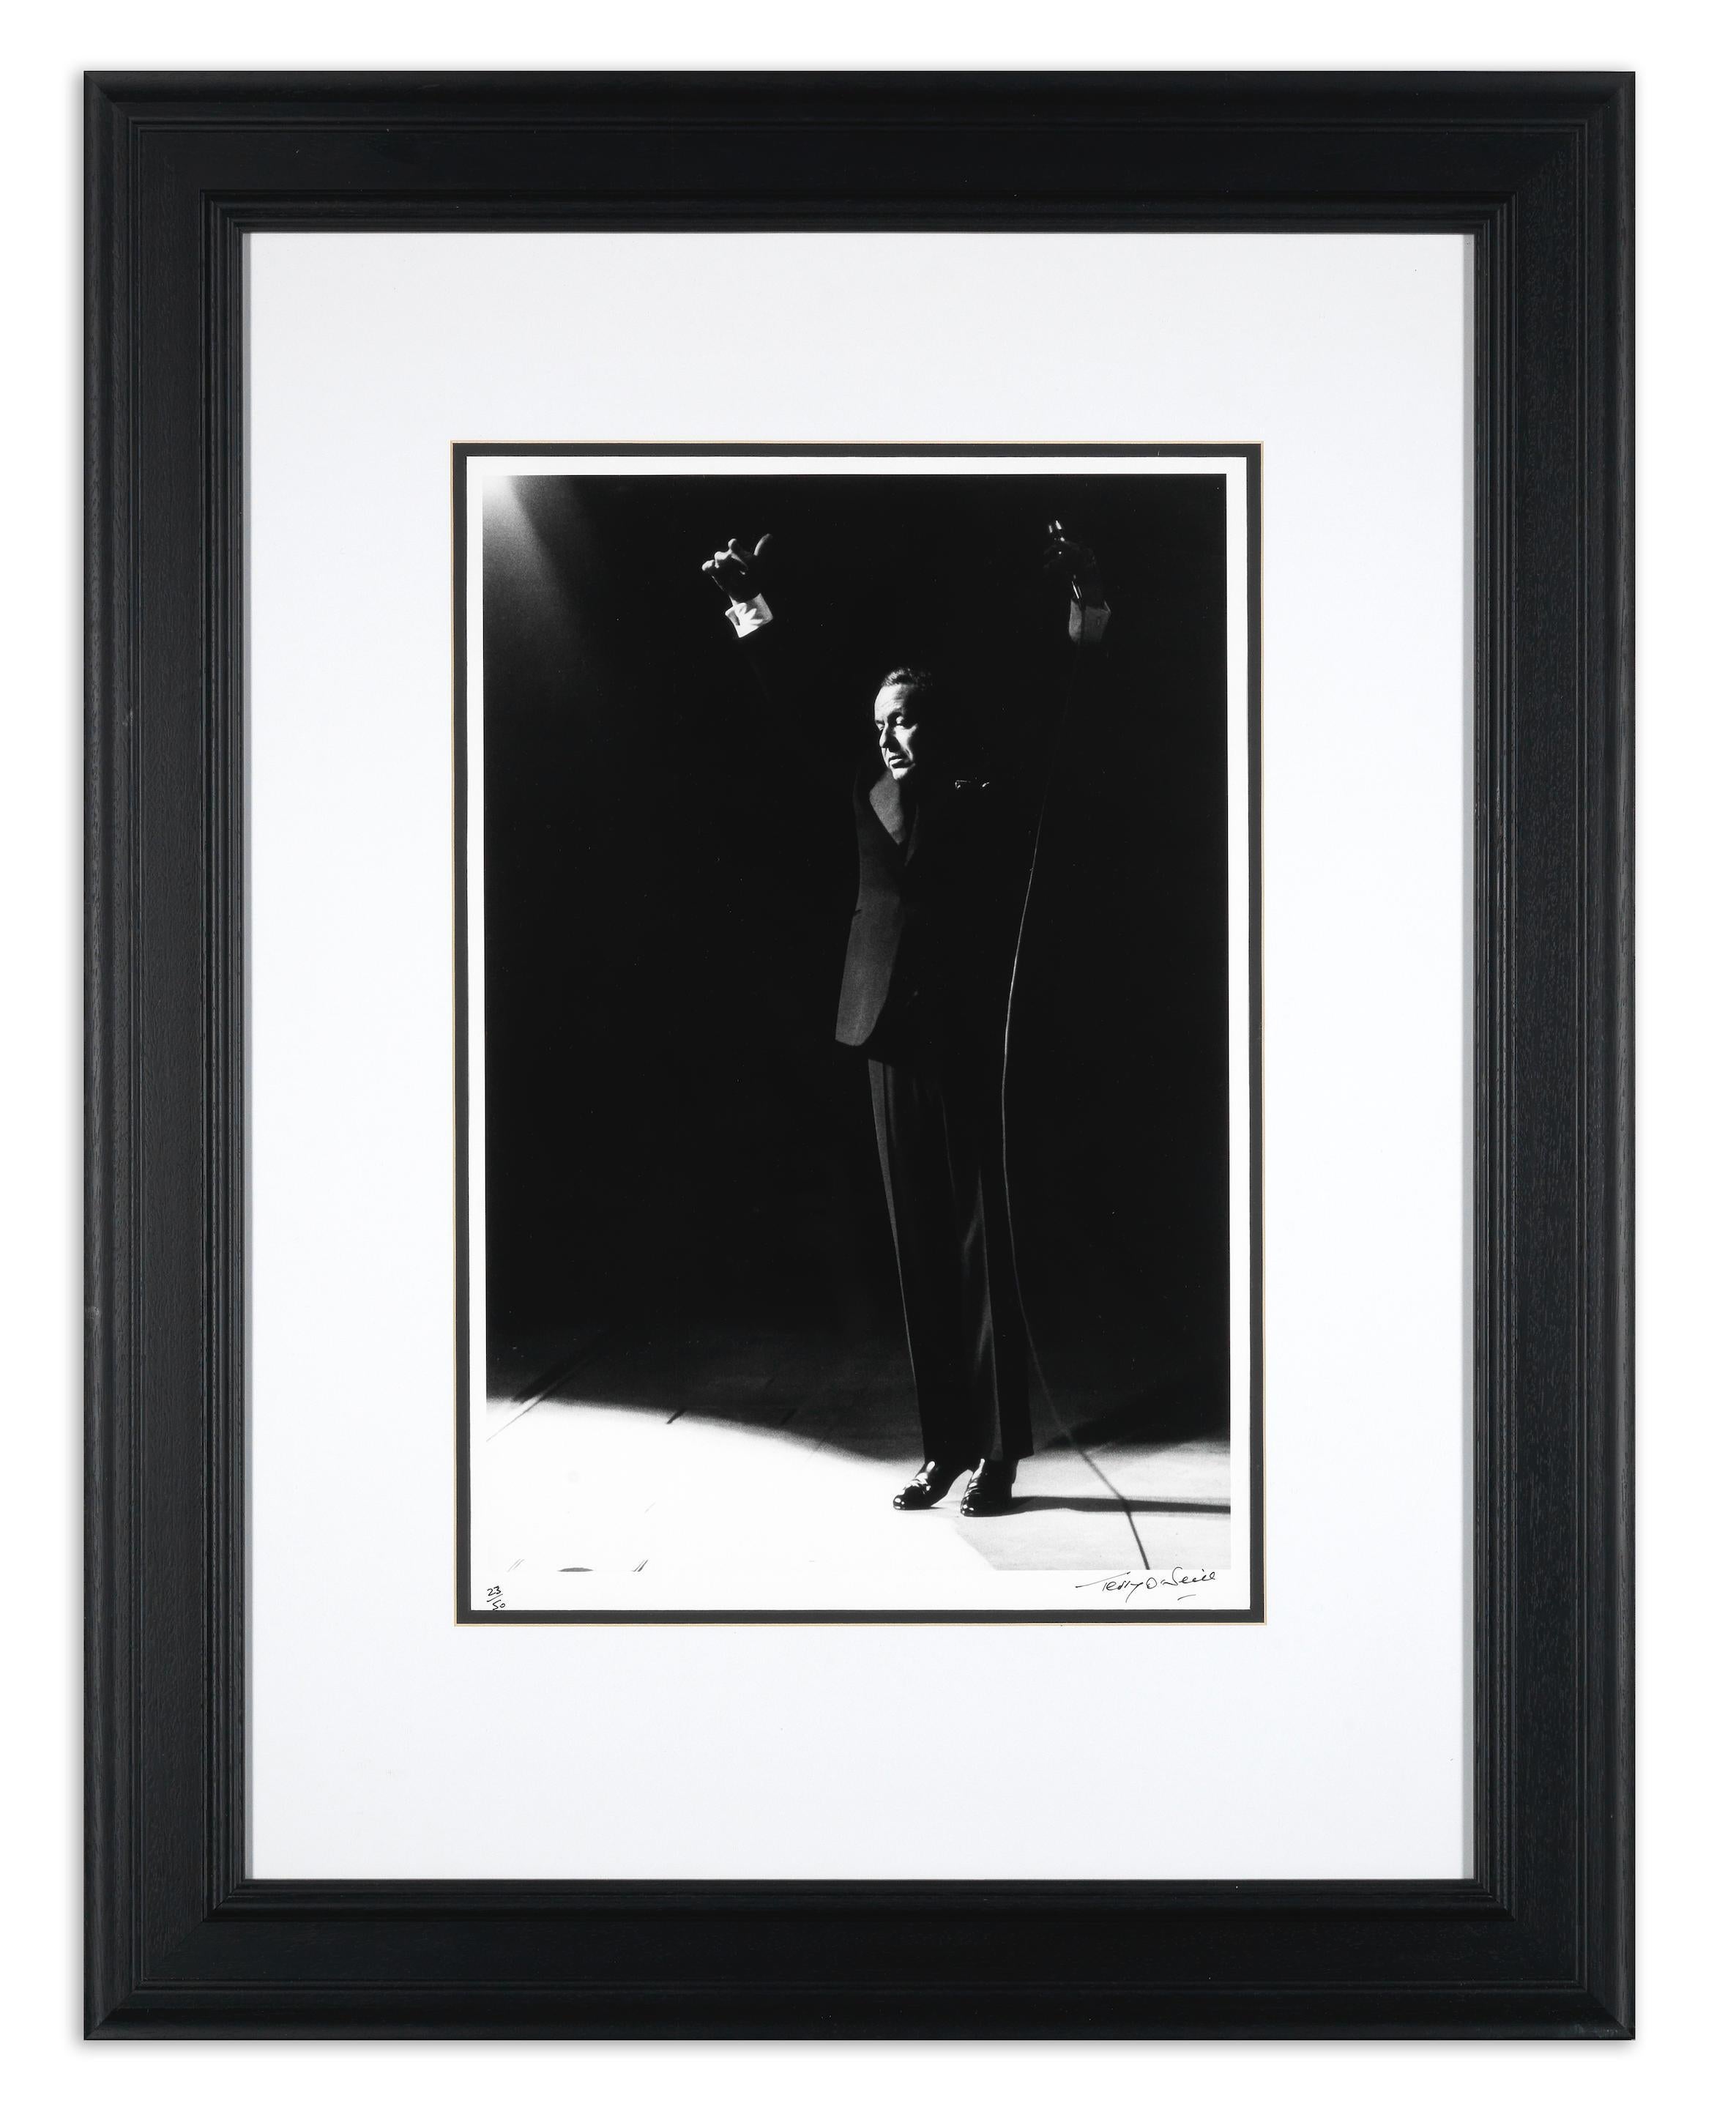 This photograph features the renowned Frank Sinatra performing on stage in London, captured by Terry O'Neill in a now iconic shot. The composition is remarkable, with the silhouette of the microphone amplified by the reflecting light against a dark